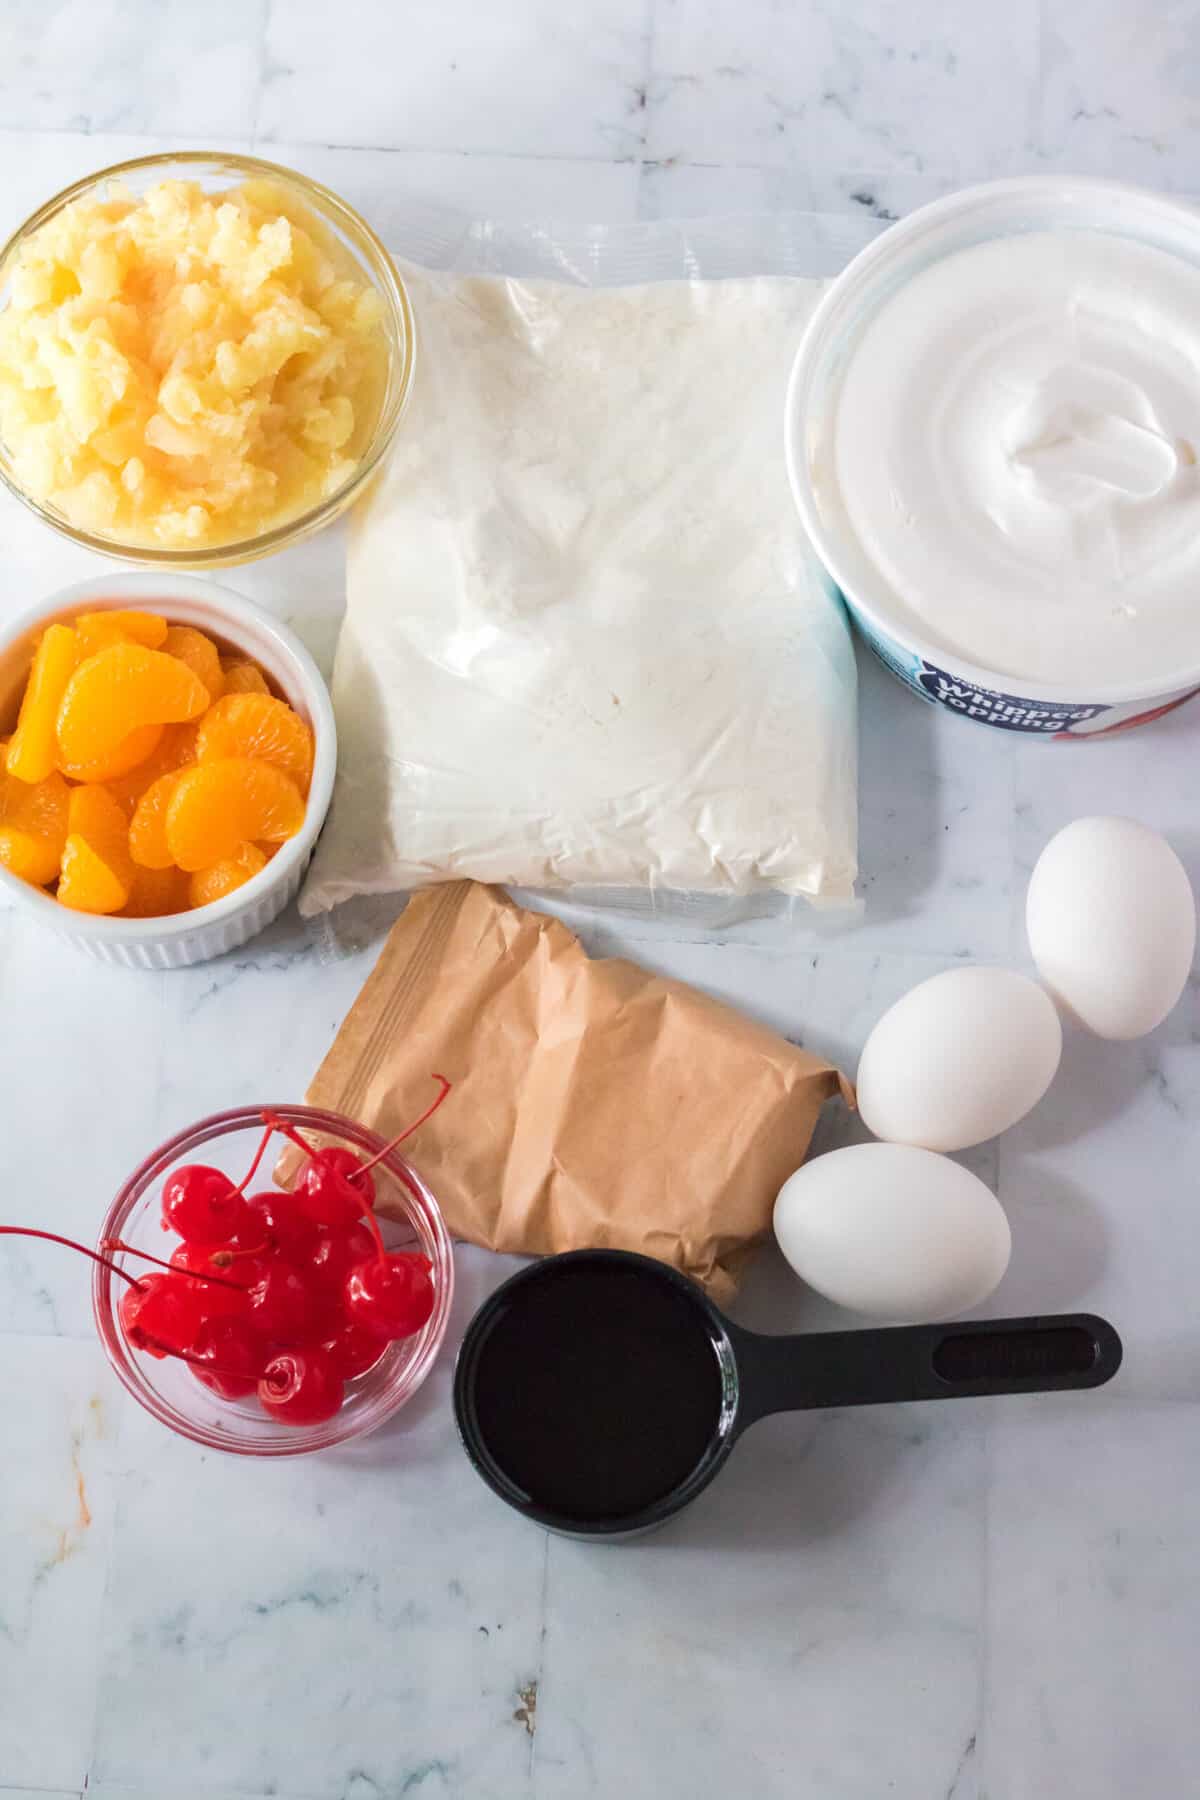 The ingredients for pig pickin cake are spread out across a countertop.